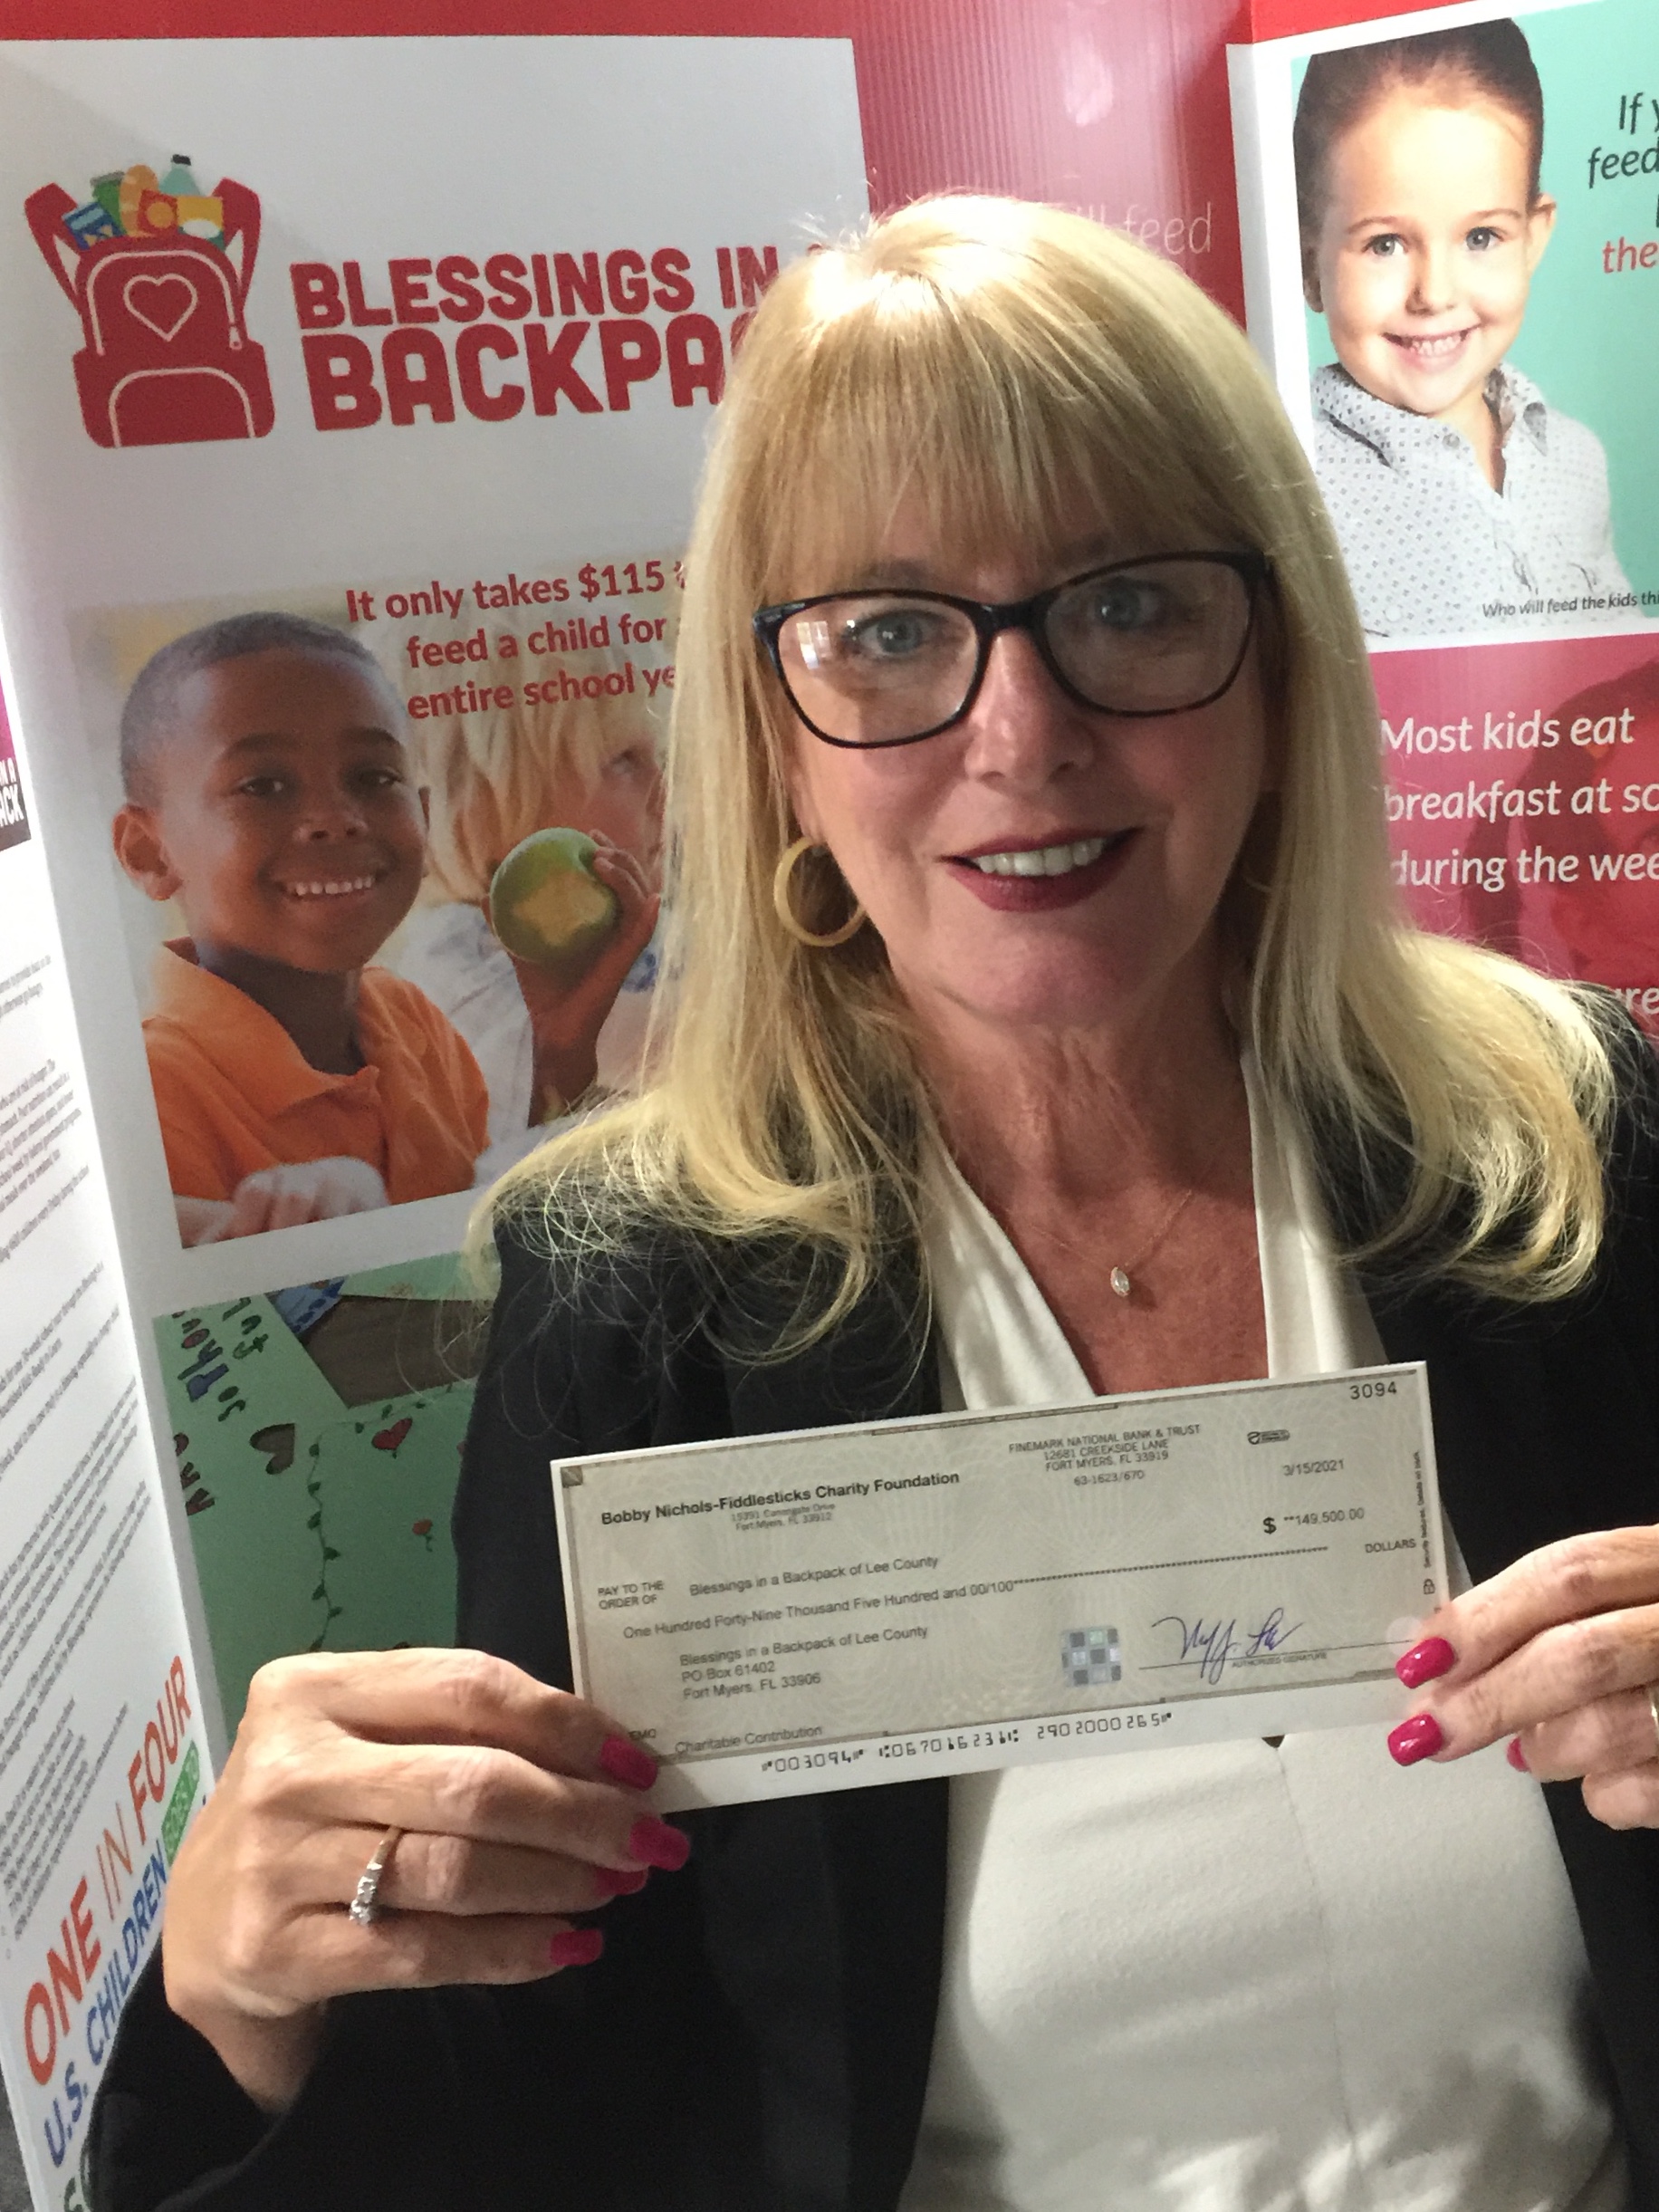 Bobby Nichols Fiddlesticks Charity Foundation Donates Nearly $150K to Blessings in a Backpack